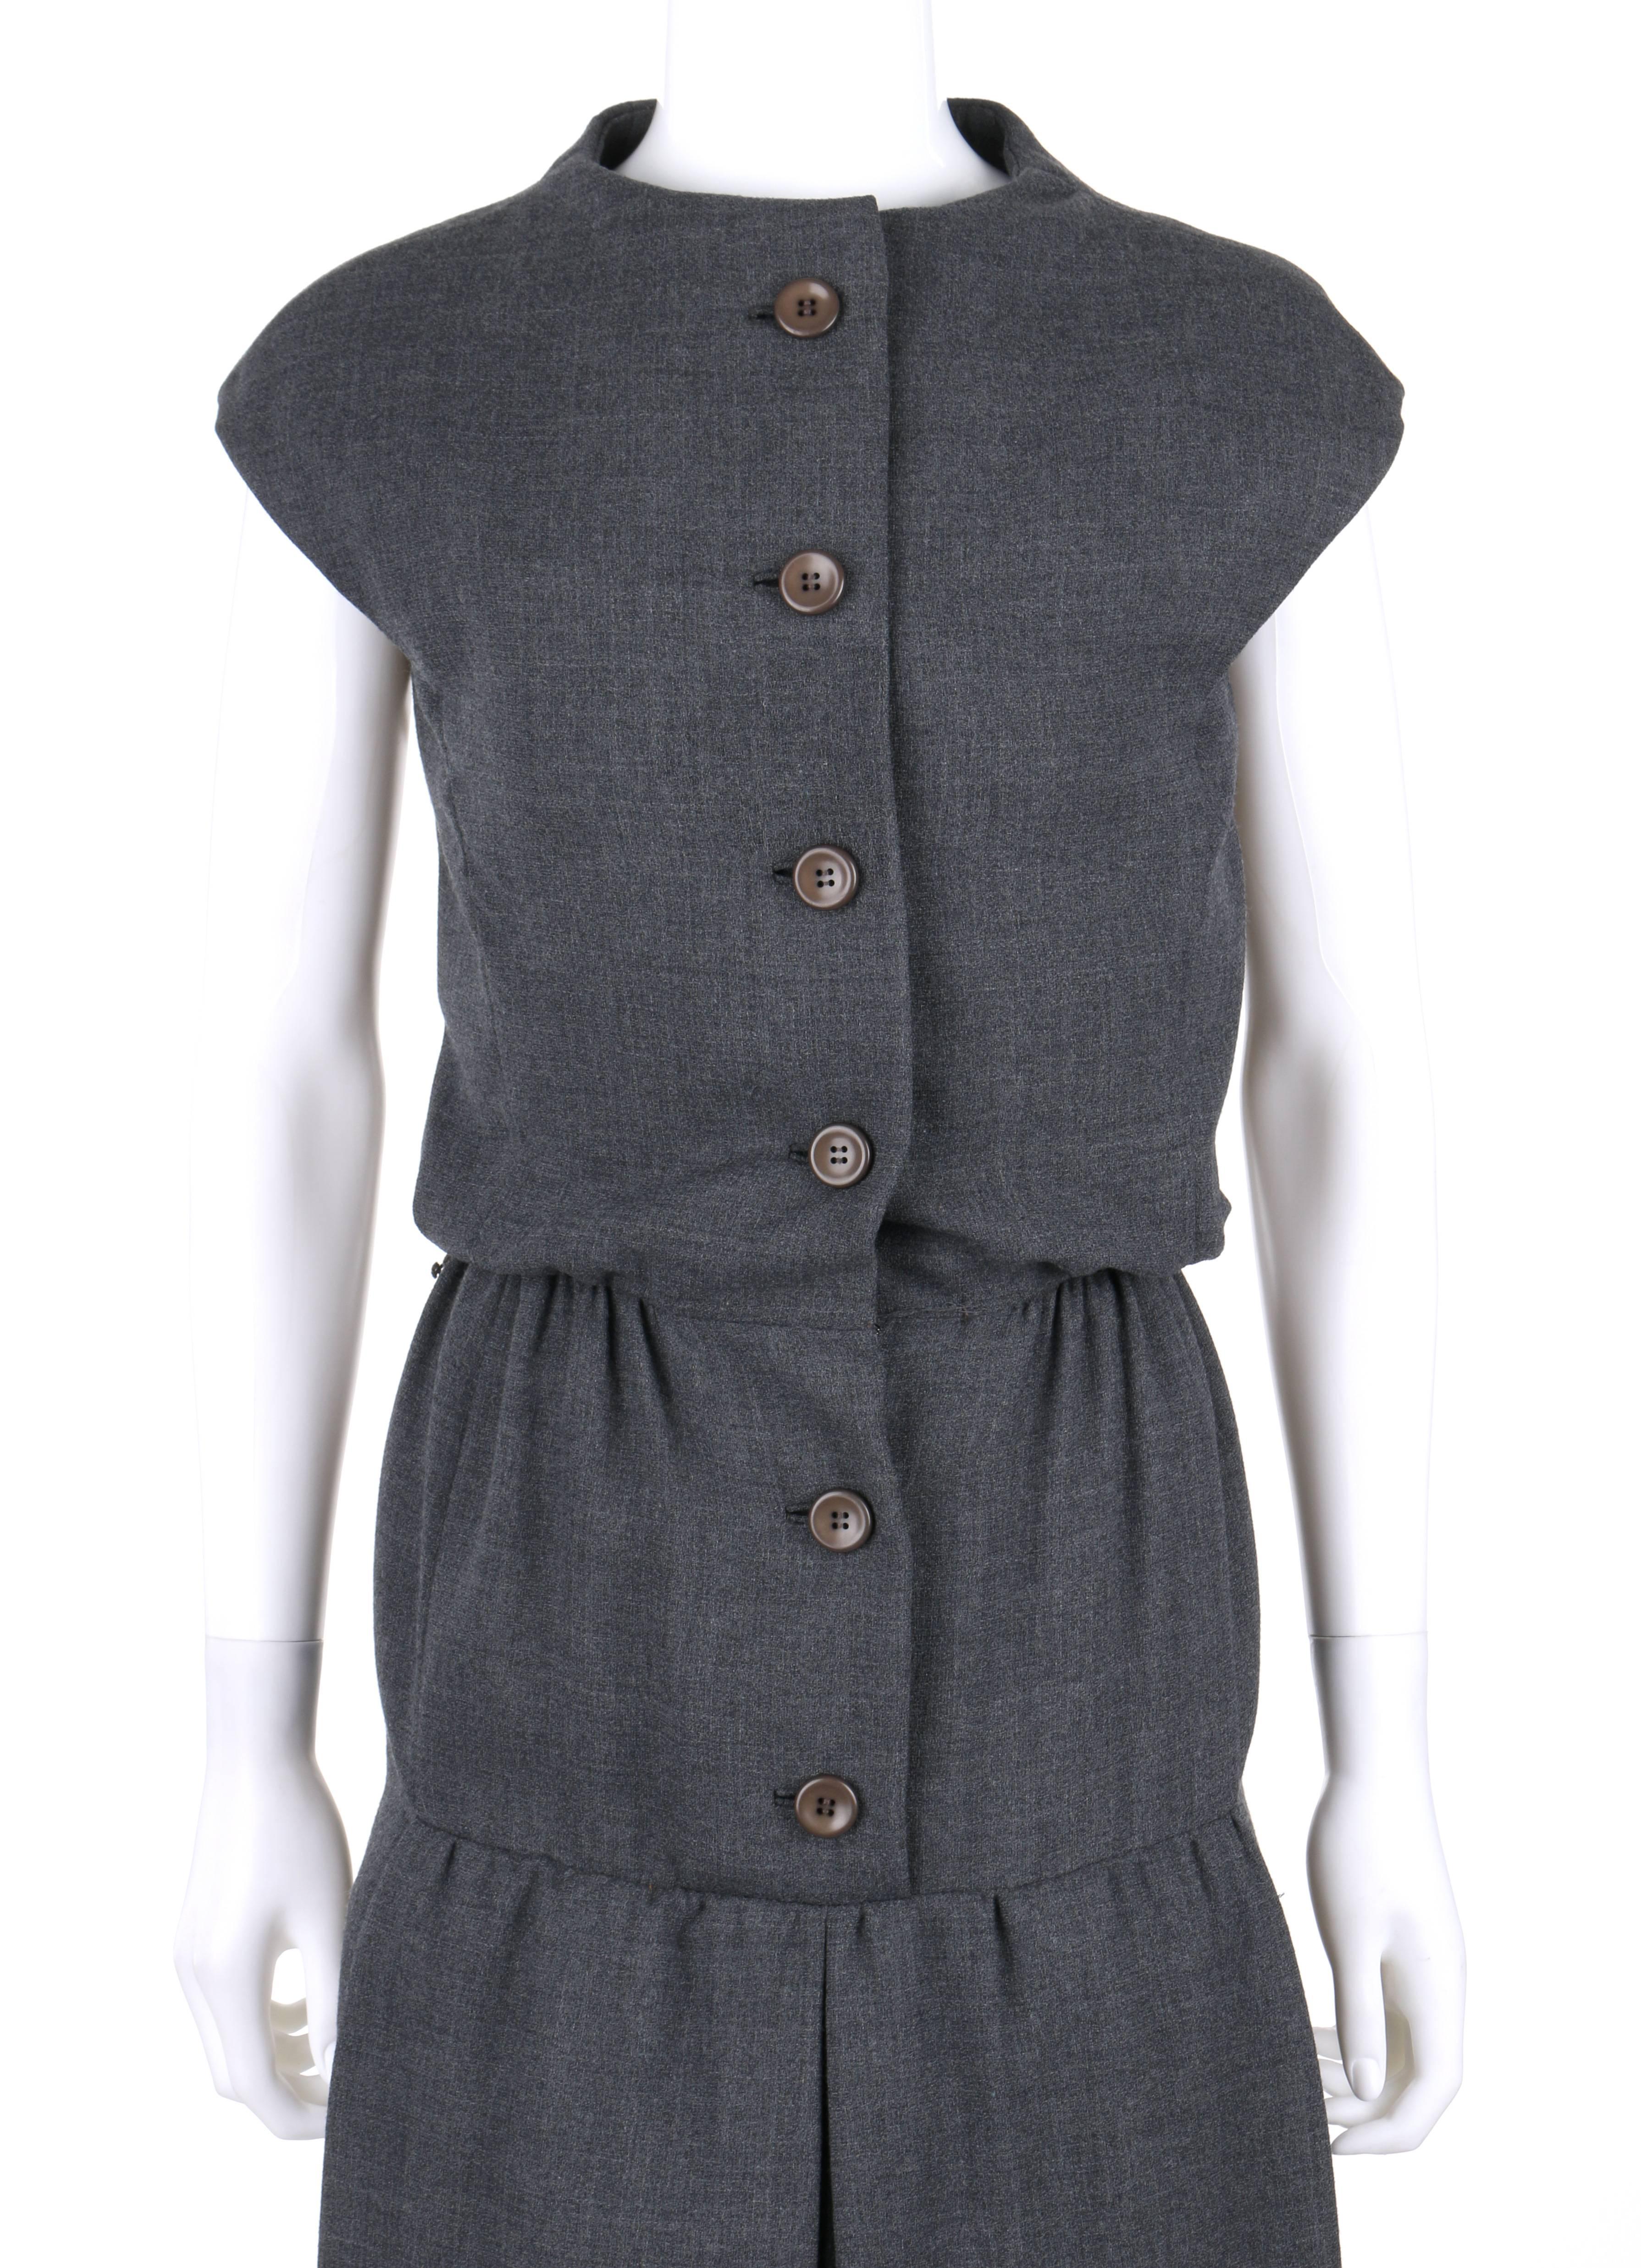 GEOFFREY BEENE c.1960's Gray Wool Button Front Belted Shift Dress 1